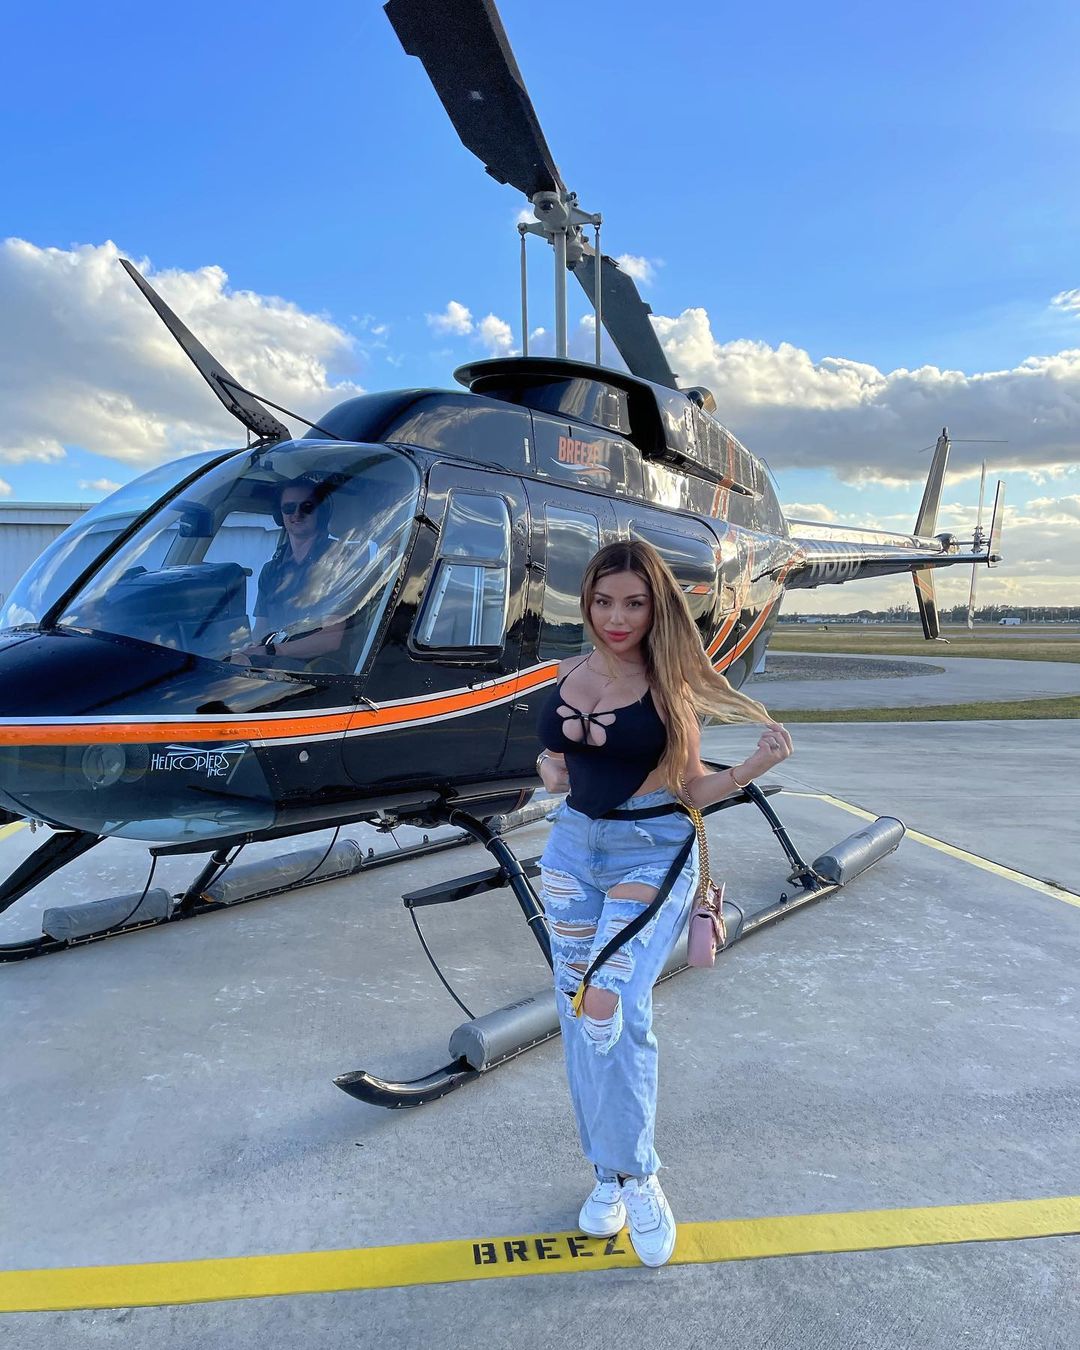 Katiana Kay posing with a helicopter